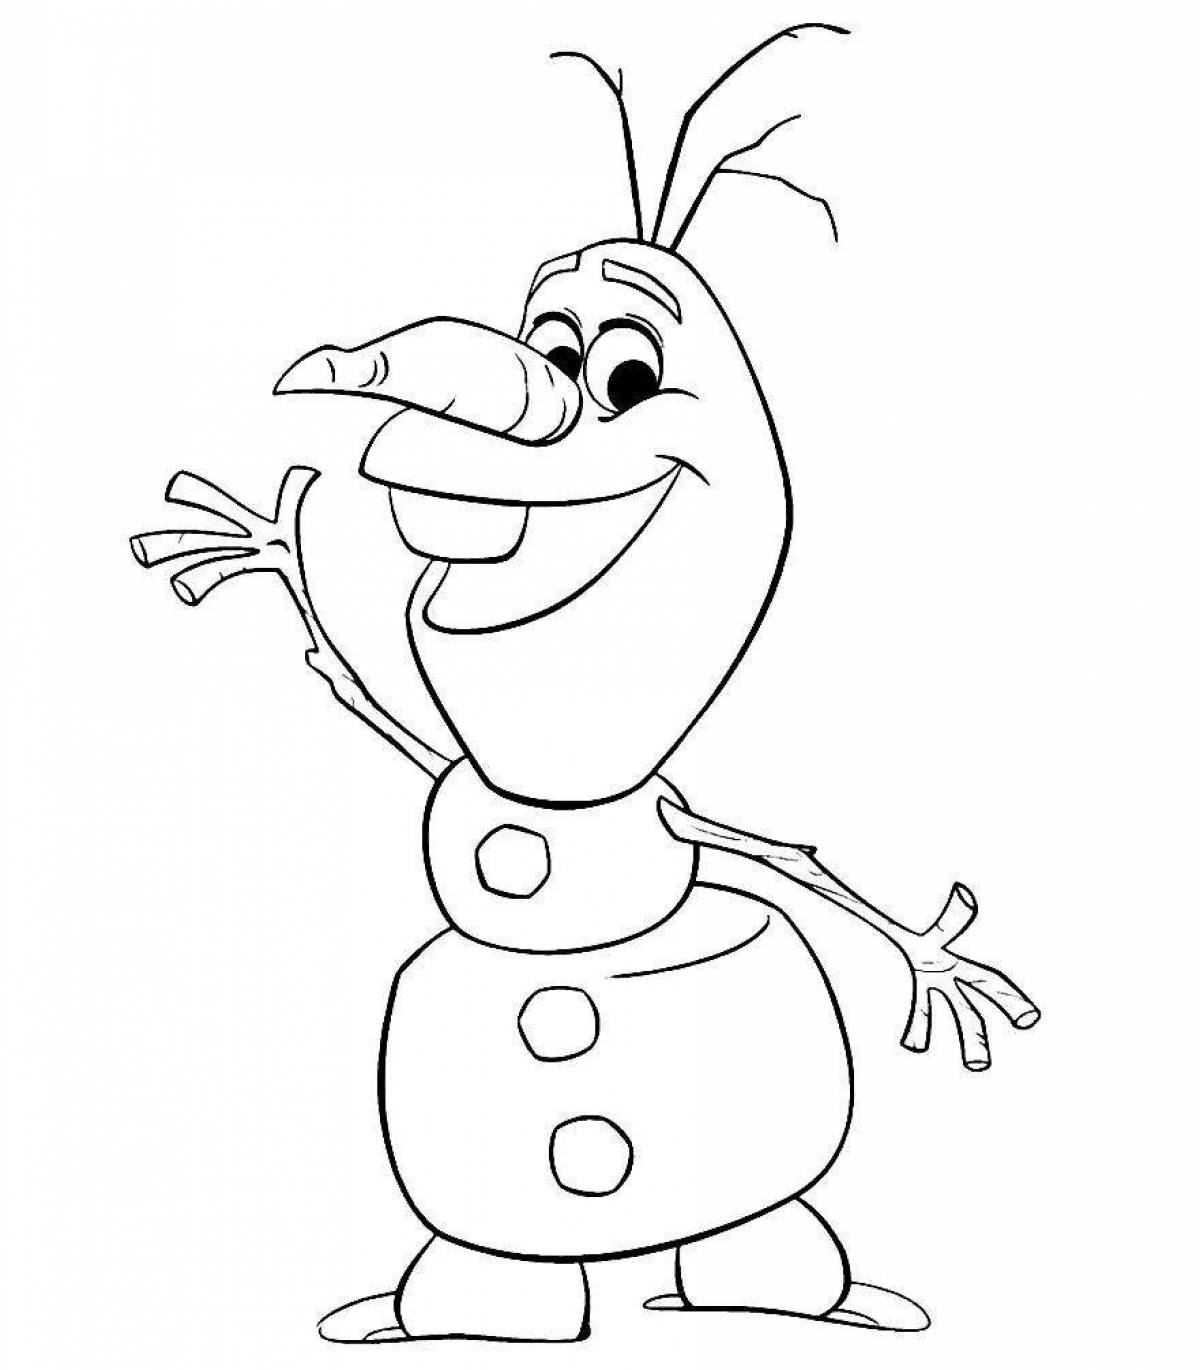 Olaf's cold heart winter coloring book